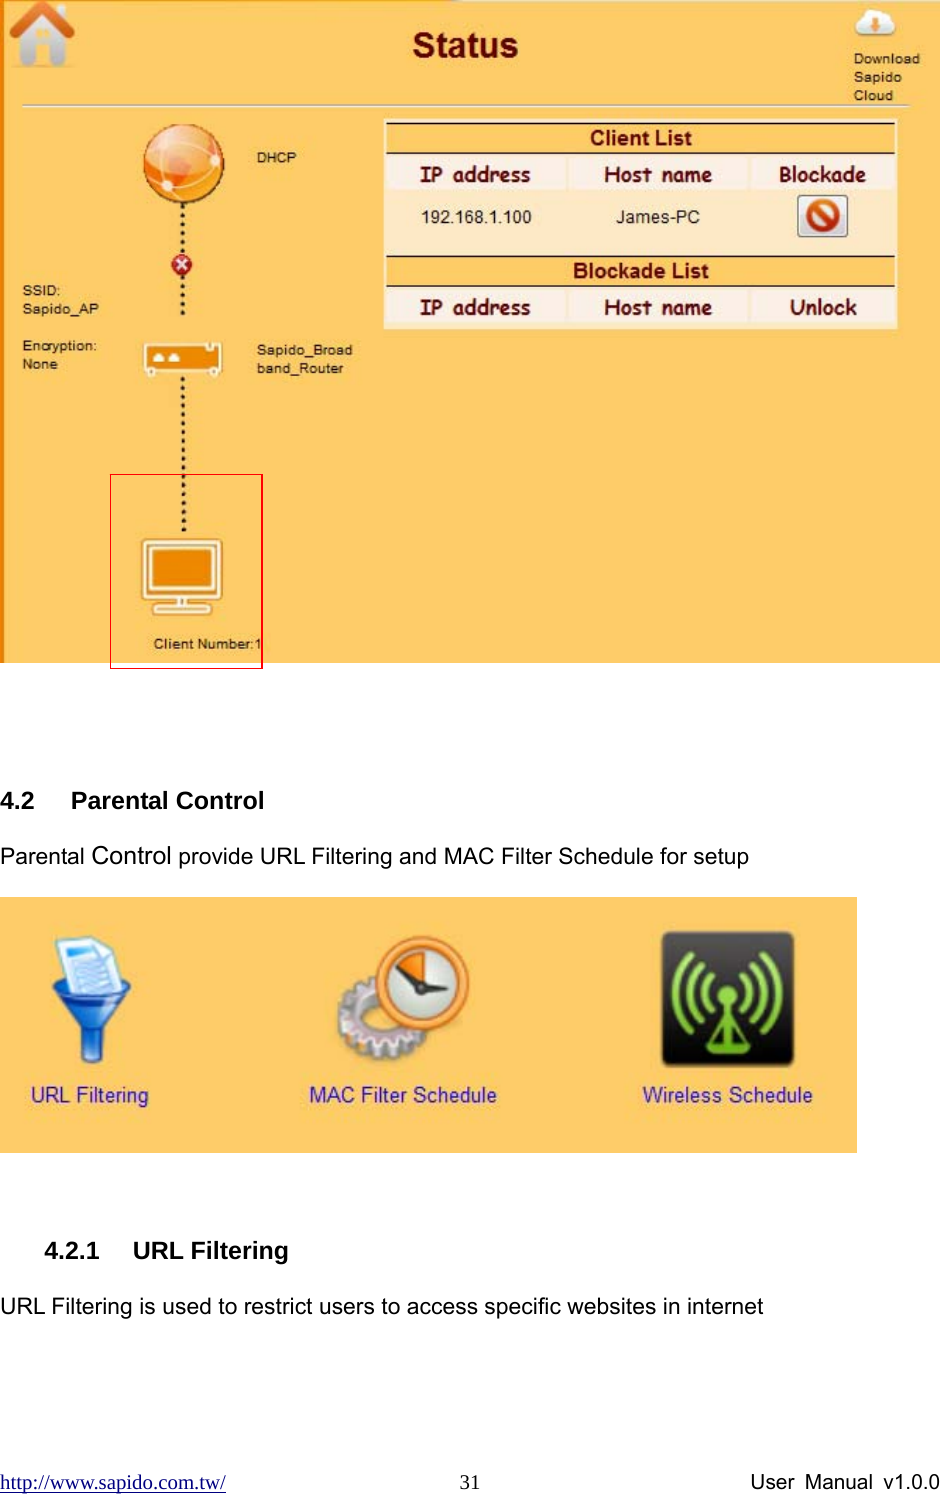 http://www.sapido.com.tw/                User Manual v1.0.0 31  4.2 Parental Control Parental Control provide URL Filtering and MAC Filter Schedule for setup   4.2.1 URL Filtering URL Filtering is used to restrict users to access specific websites in internet 